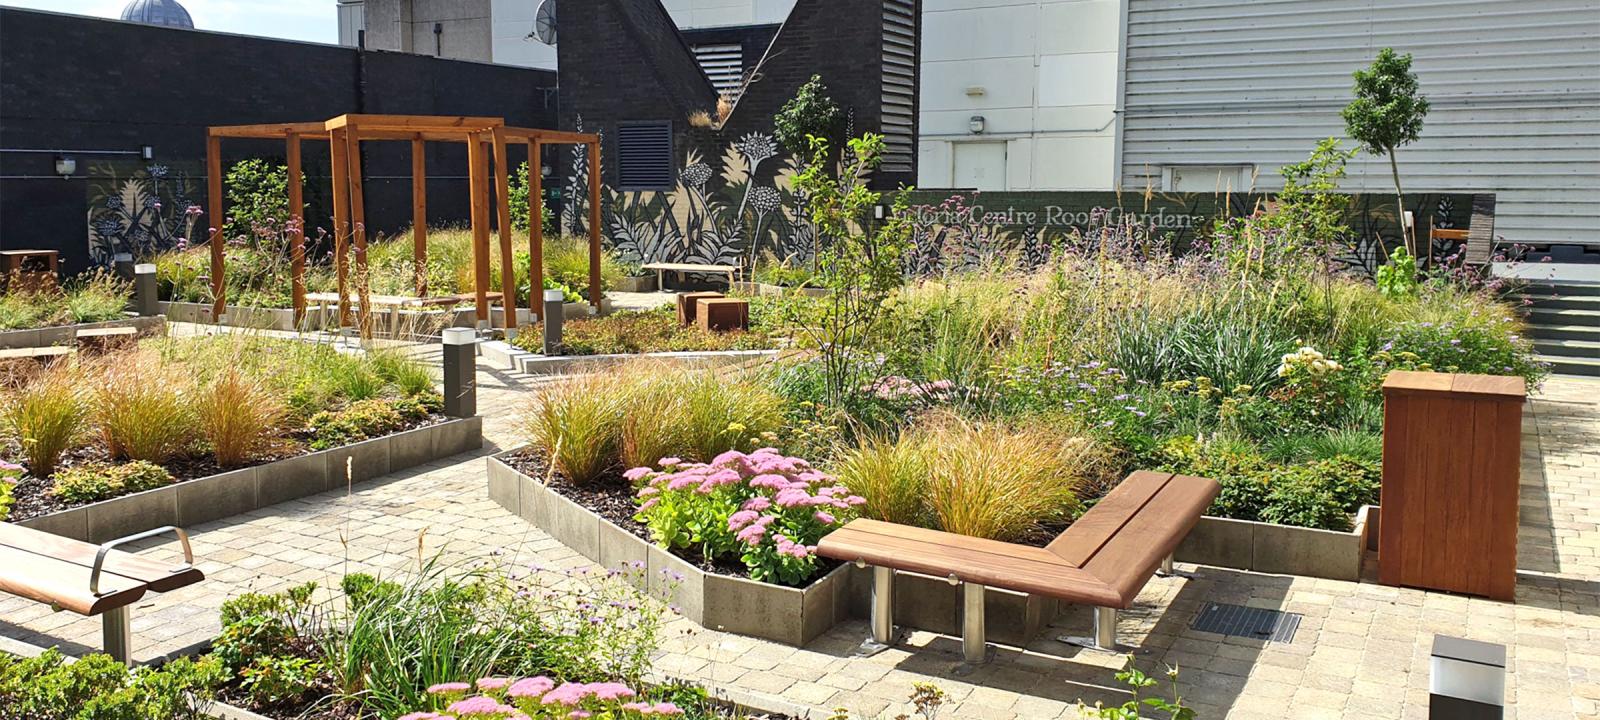 Roof garden with flower beds, walkways, benches and a wooden pergola